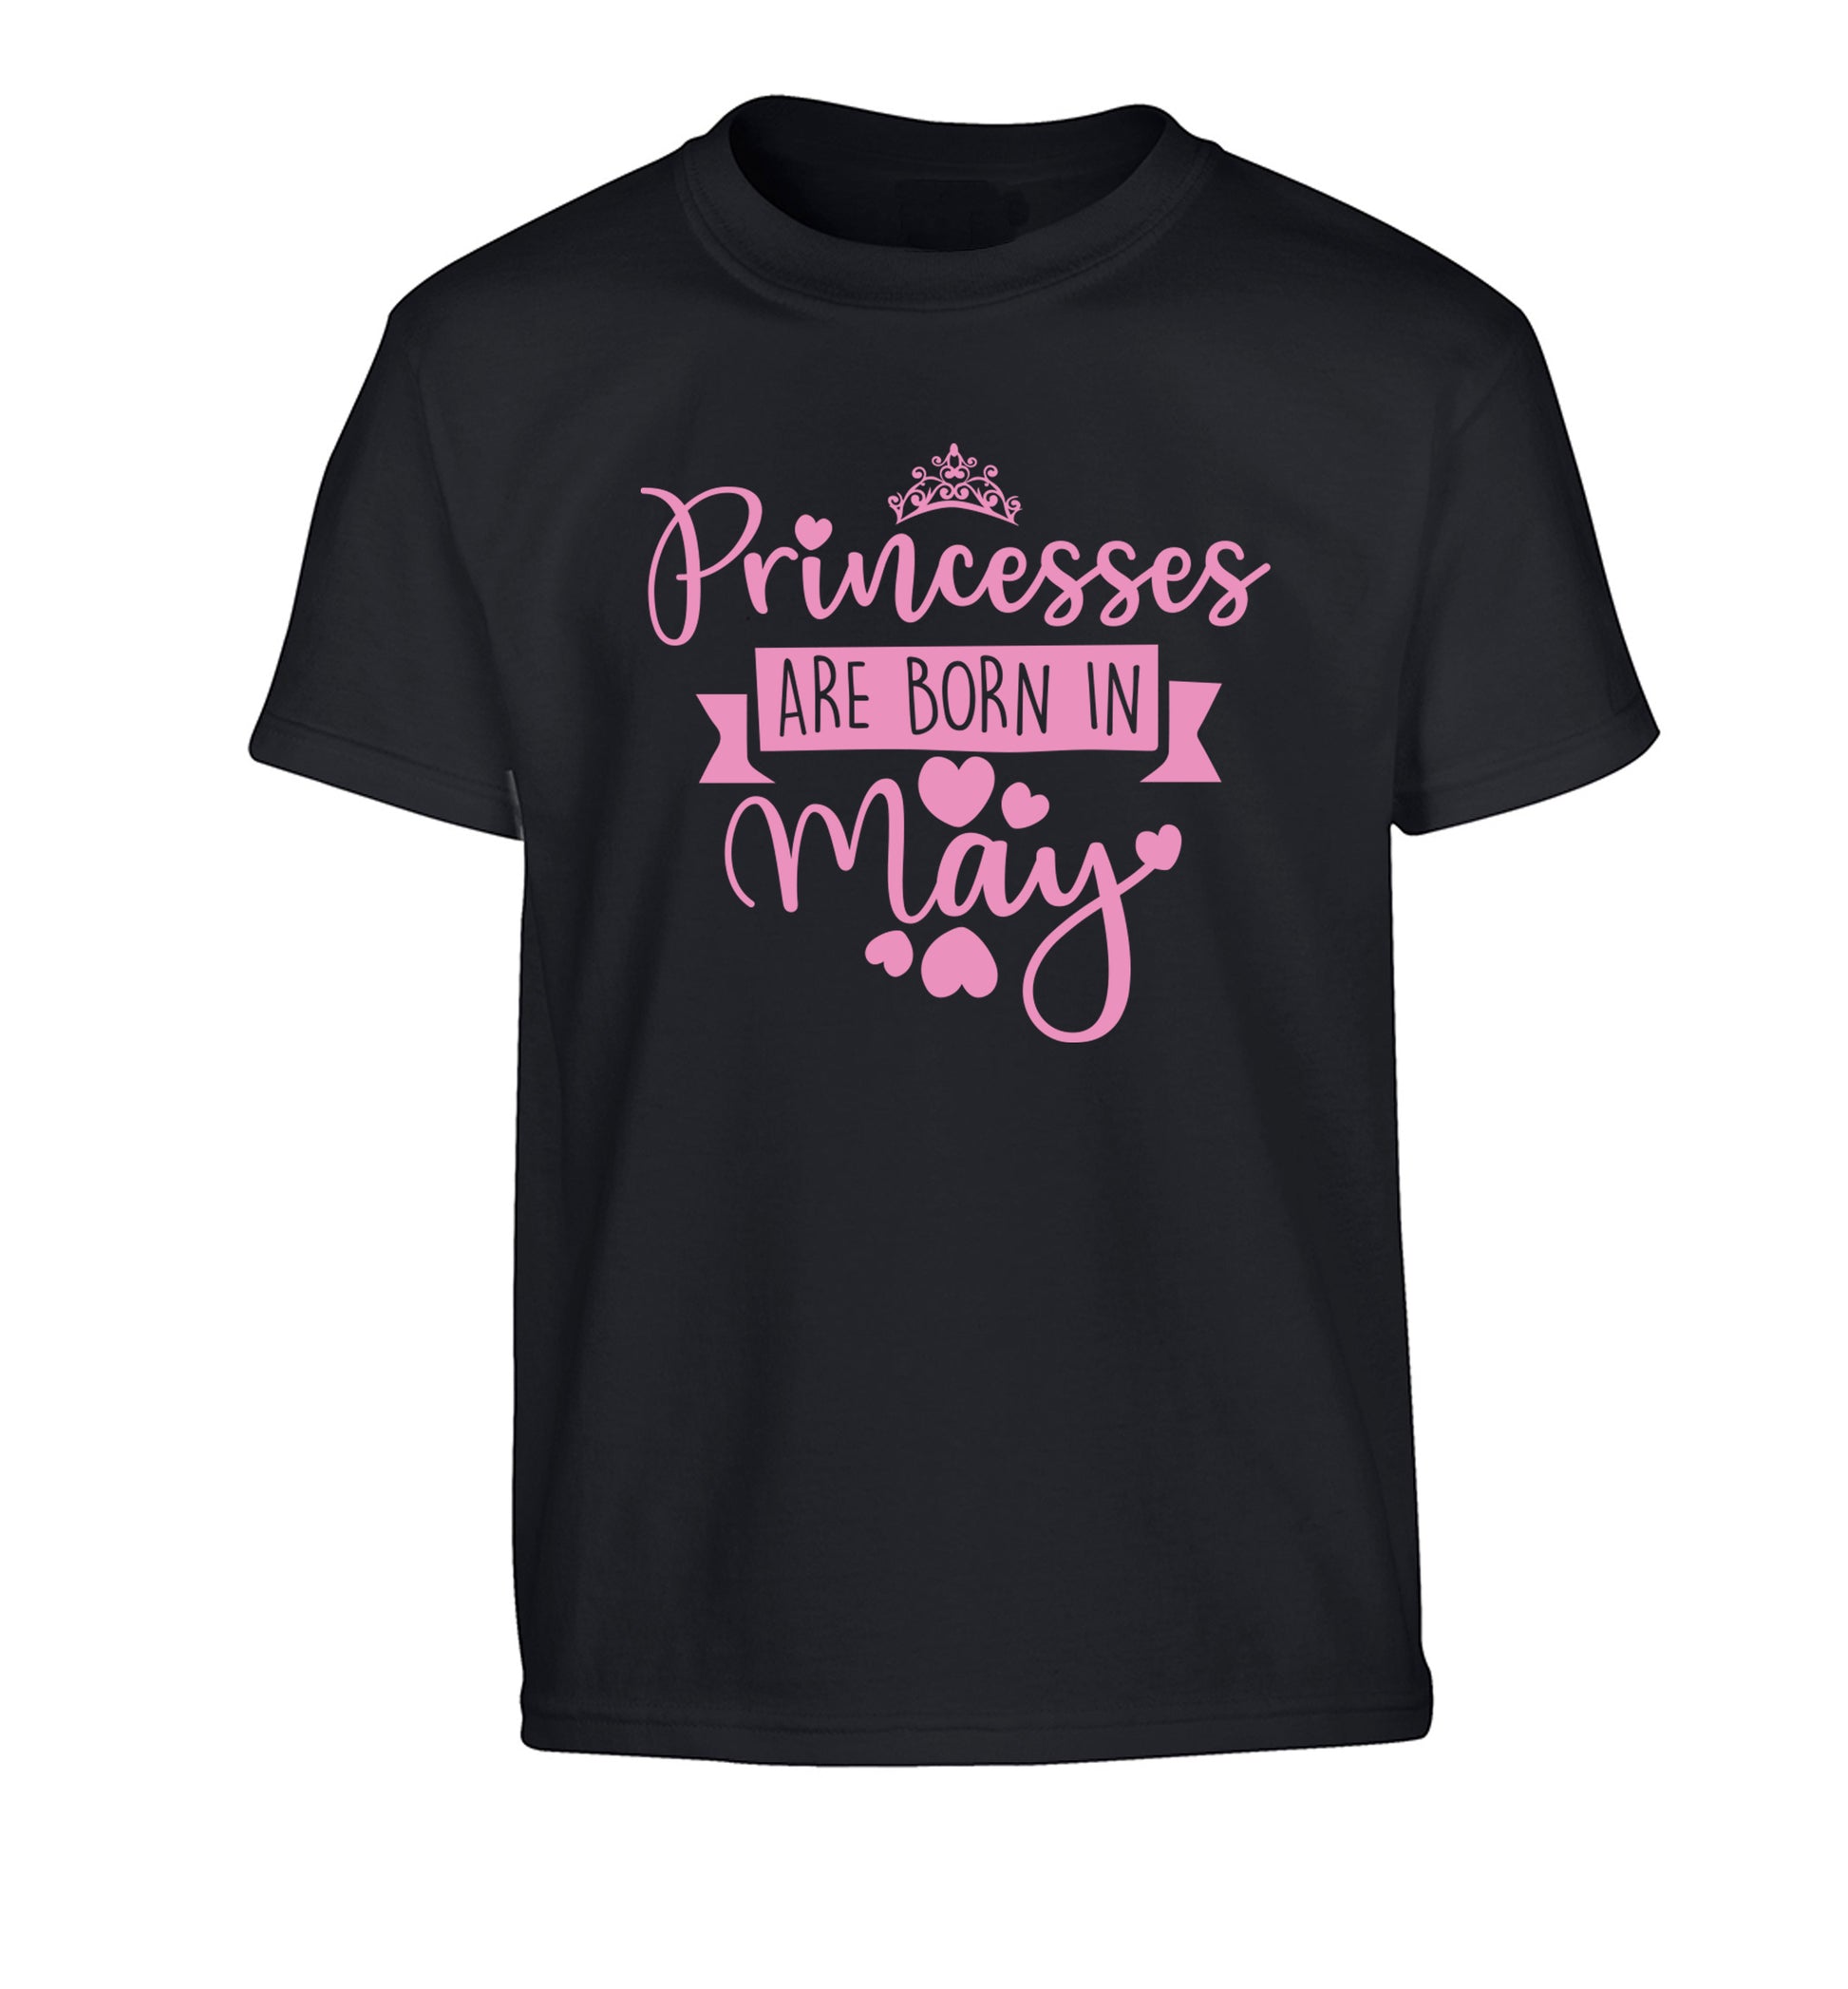 Princesses are born in May Children's black Tshirt 12-13 Years